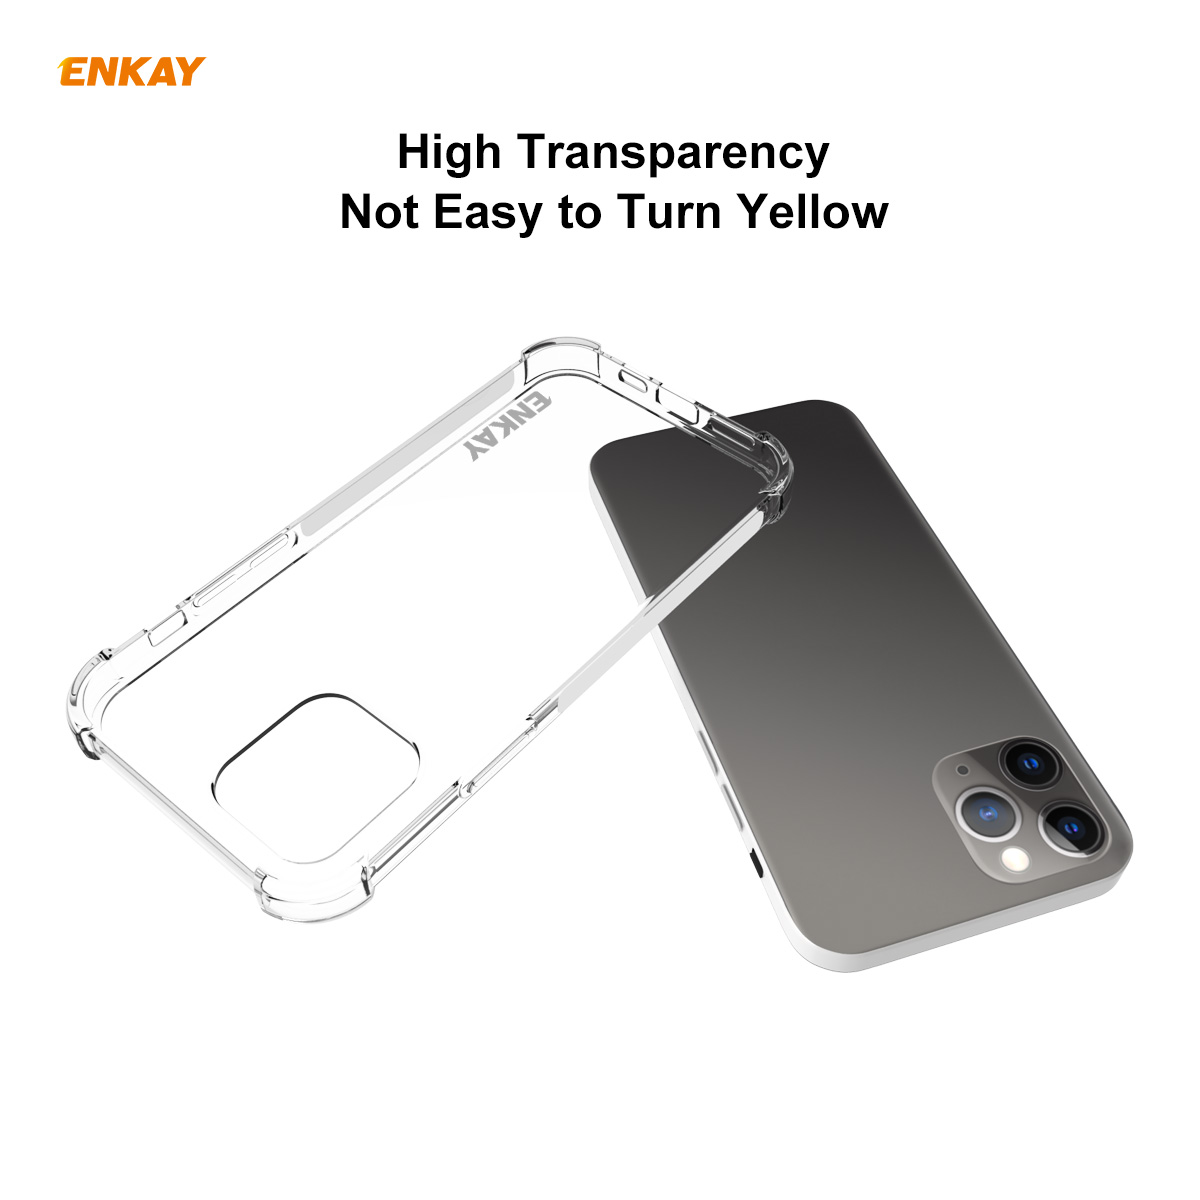 Enkay-2-in-1-for-iPhone-12-Pro--12-Accessories-with-Airbags-Non-Yellow-Transparent-TPU-Protective-Ca-1770210-6